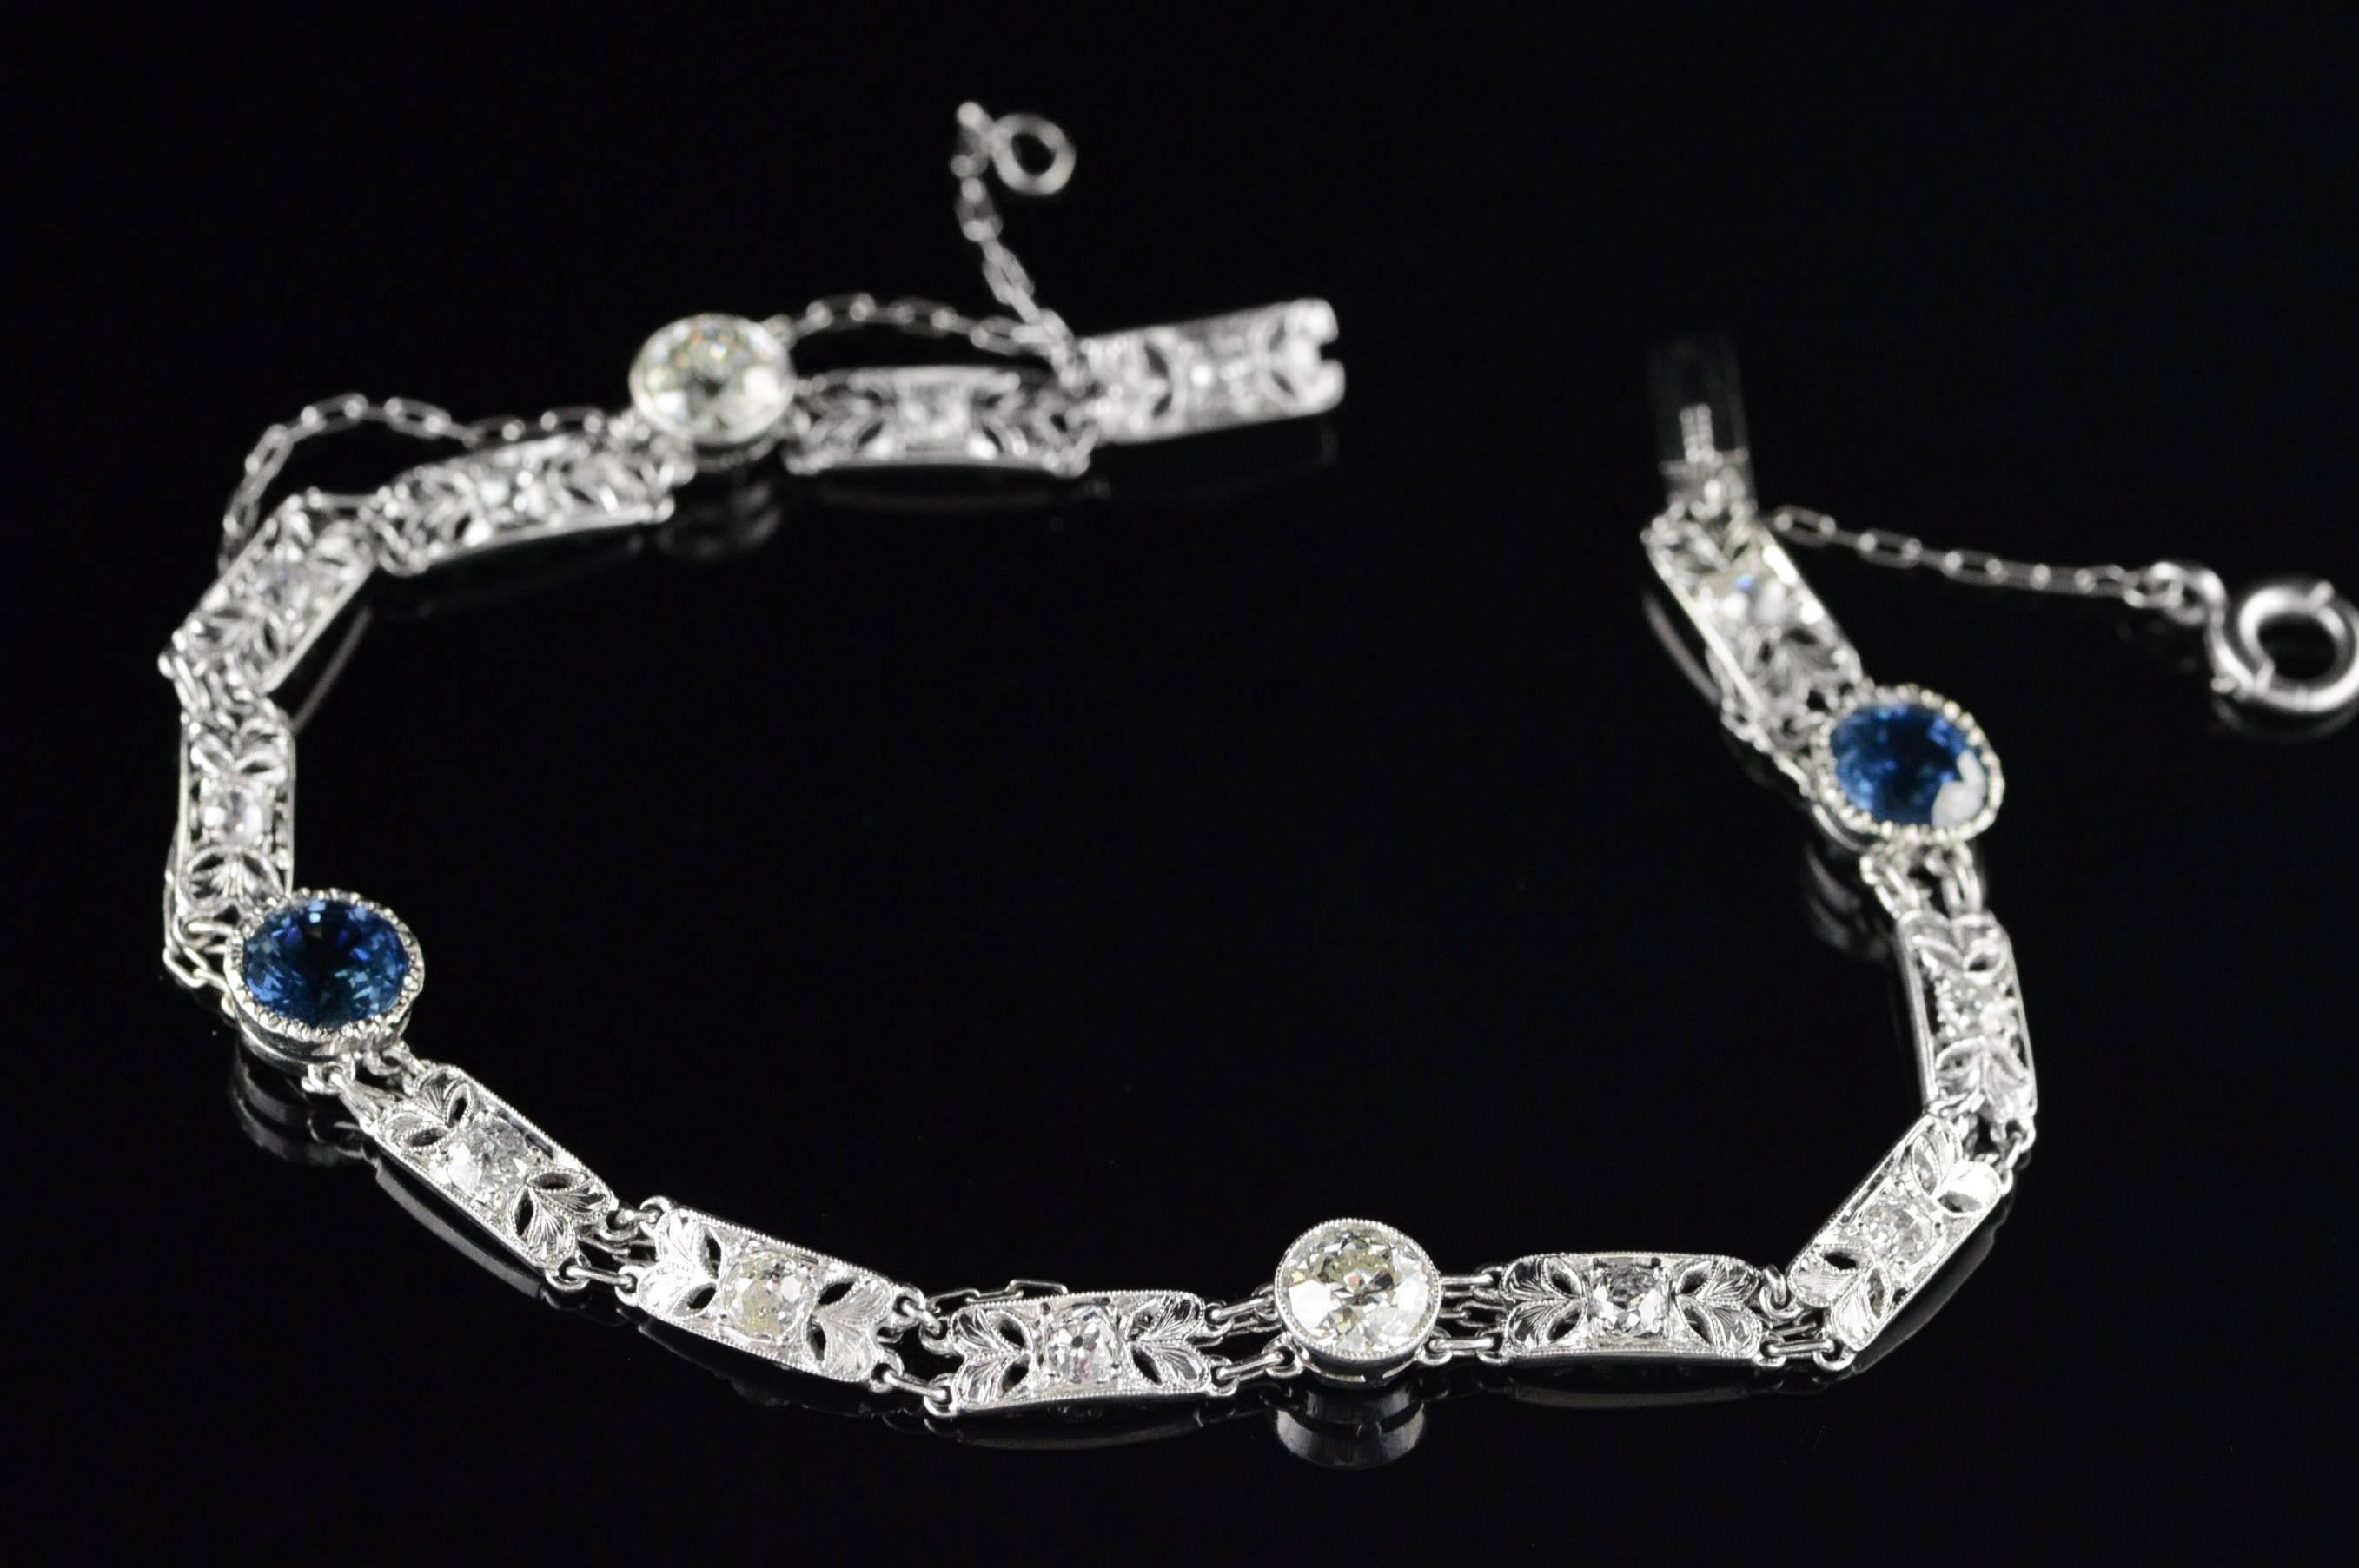  platinum bracelet features two sapphires equaling 2.30 carats and 2 old European cut diamonds equaling 1.30 carats. A safety chain runs the length of the bracelet to maintain its integrity even if a link should be broken.

All diamonds are graded